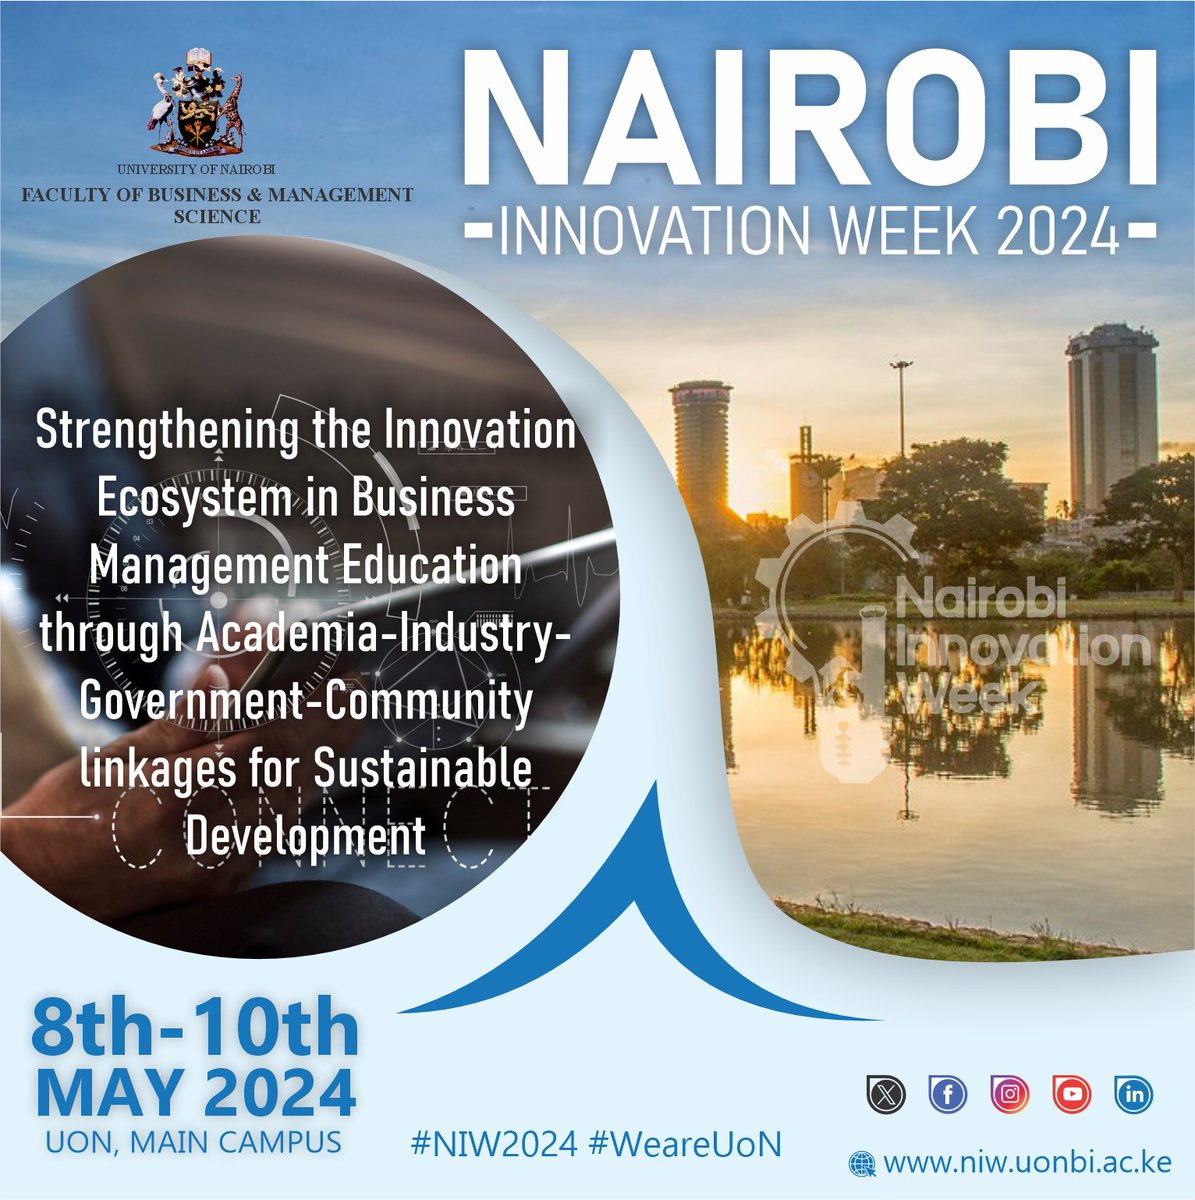 It's getting closer!!🙌 @uonbibusiness  is also jumping on #NIW2024 . join us on 8th to 10th may  @uonbi  to understand their role in innovation.#WeareUoN